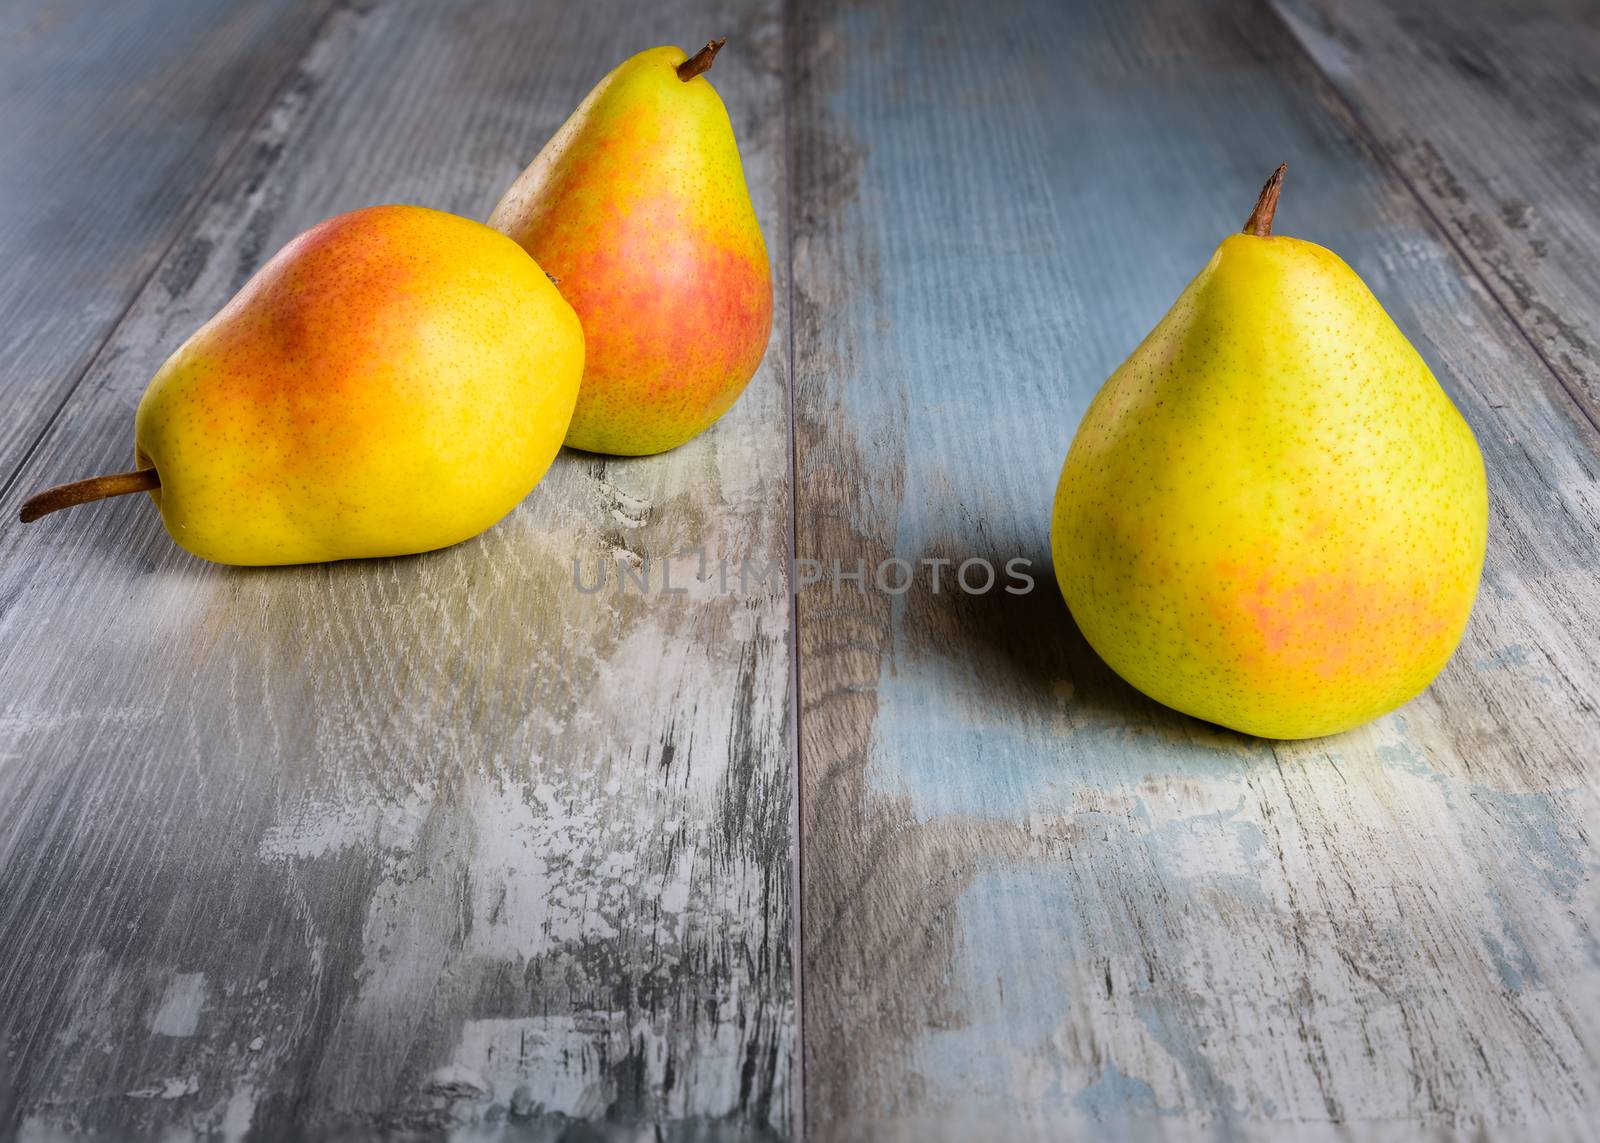 Pears  on an old wooden table (close-up shot).